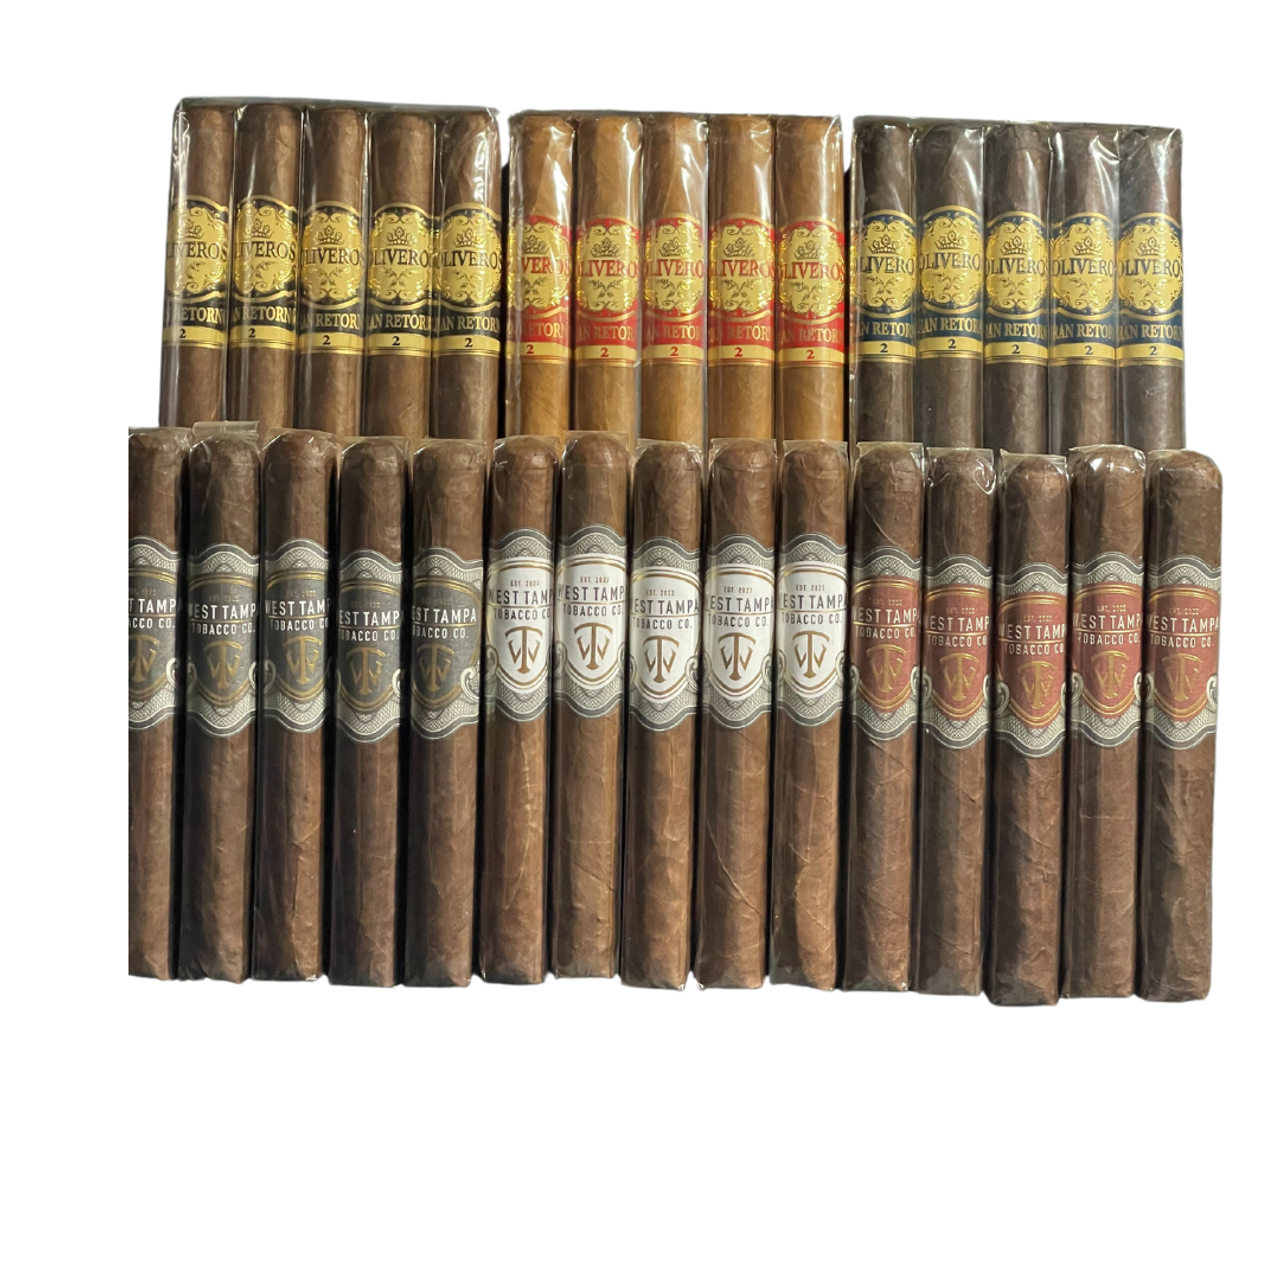 Big Brand Battle 15 West Tampa Tobacco VS. 15 Oliveros OVER 1/2 off + FREE shipping from cigarsamplers.com LOAD UP!!!